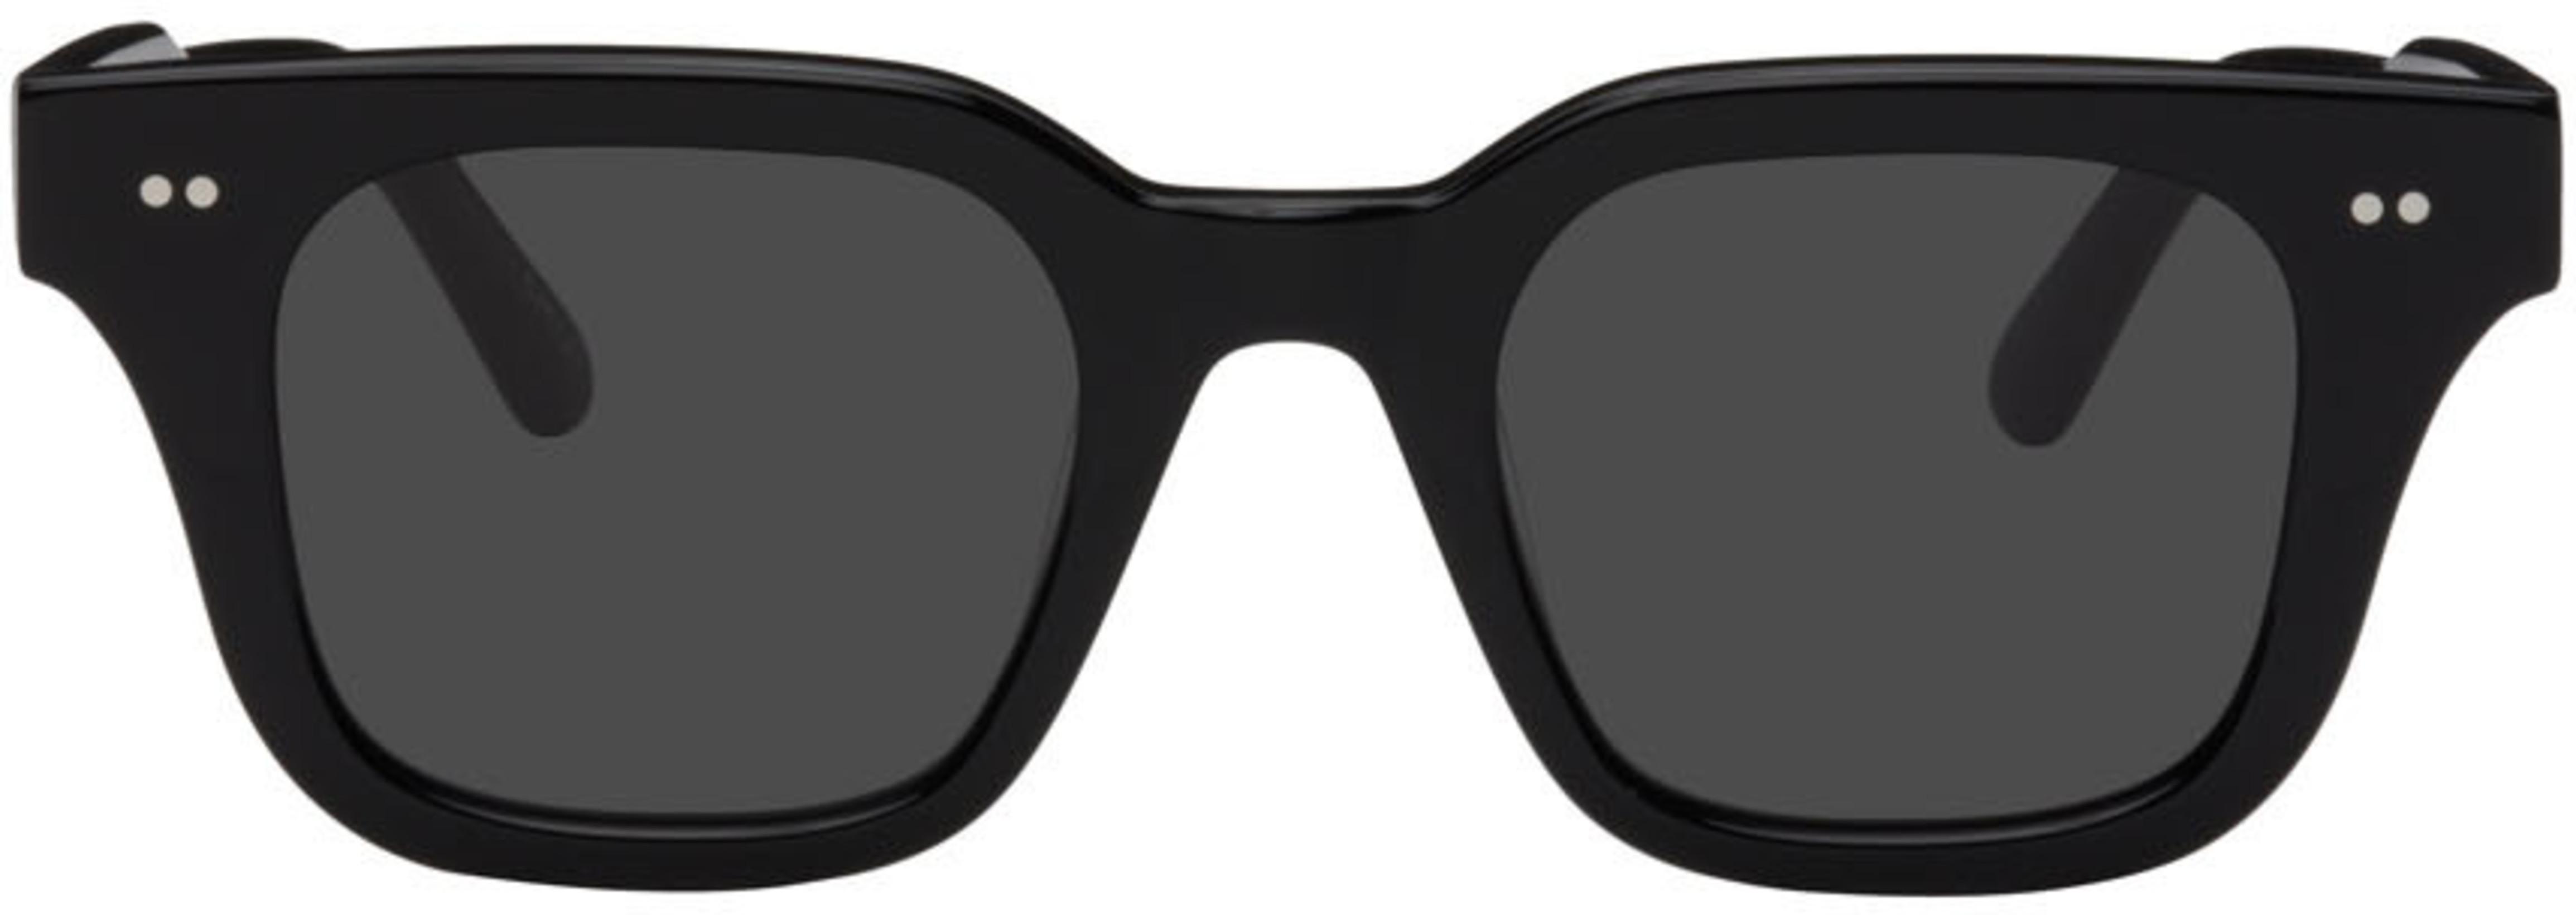 Black Large 04 Sunglasses by CHIMI